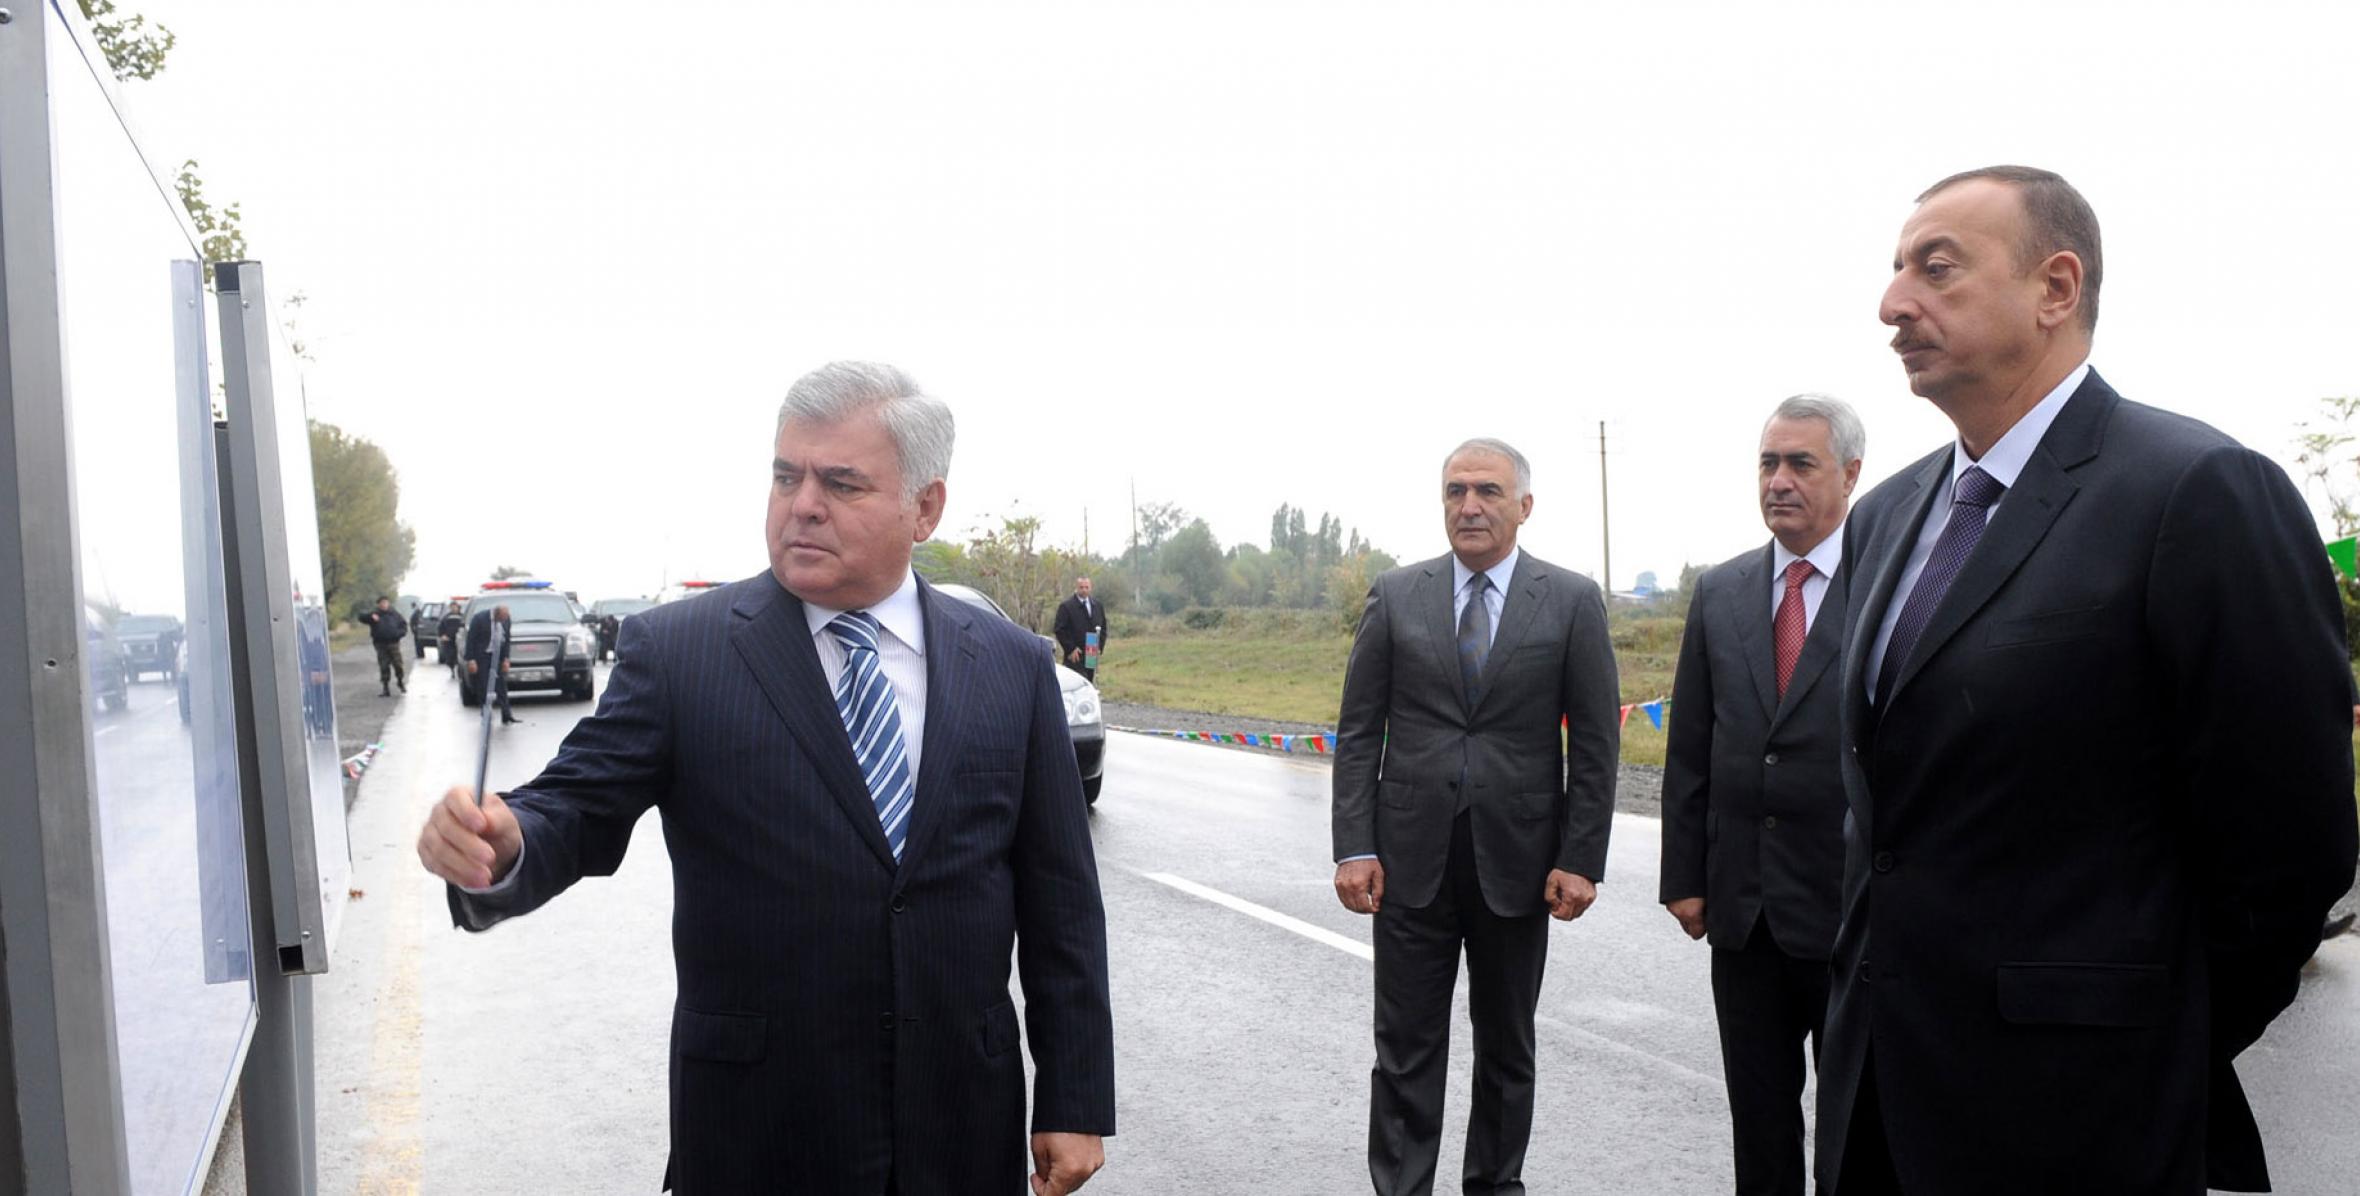 Ilham Aliyev attended the opening of a 12-km section of the Agdash-Laki road